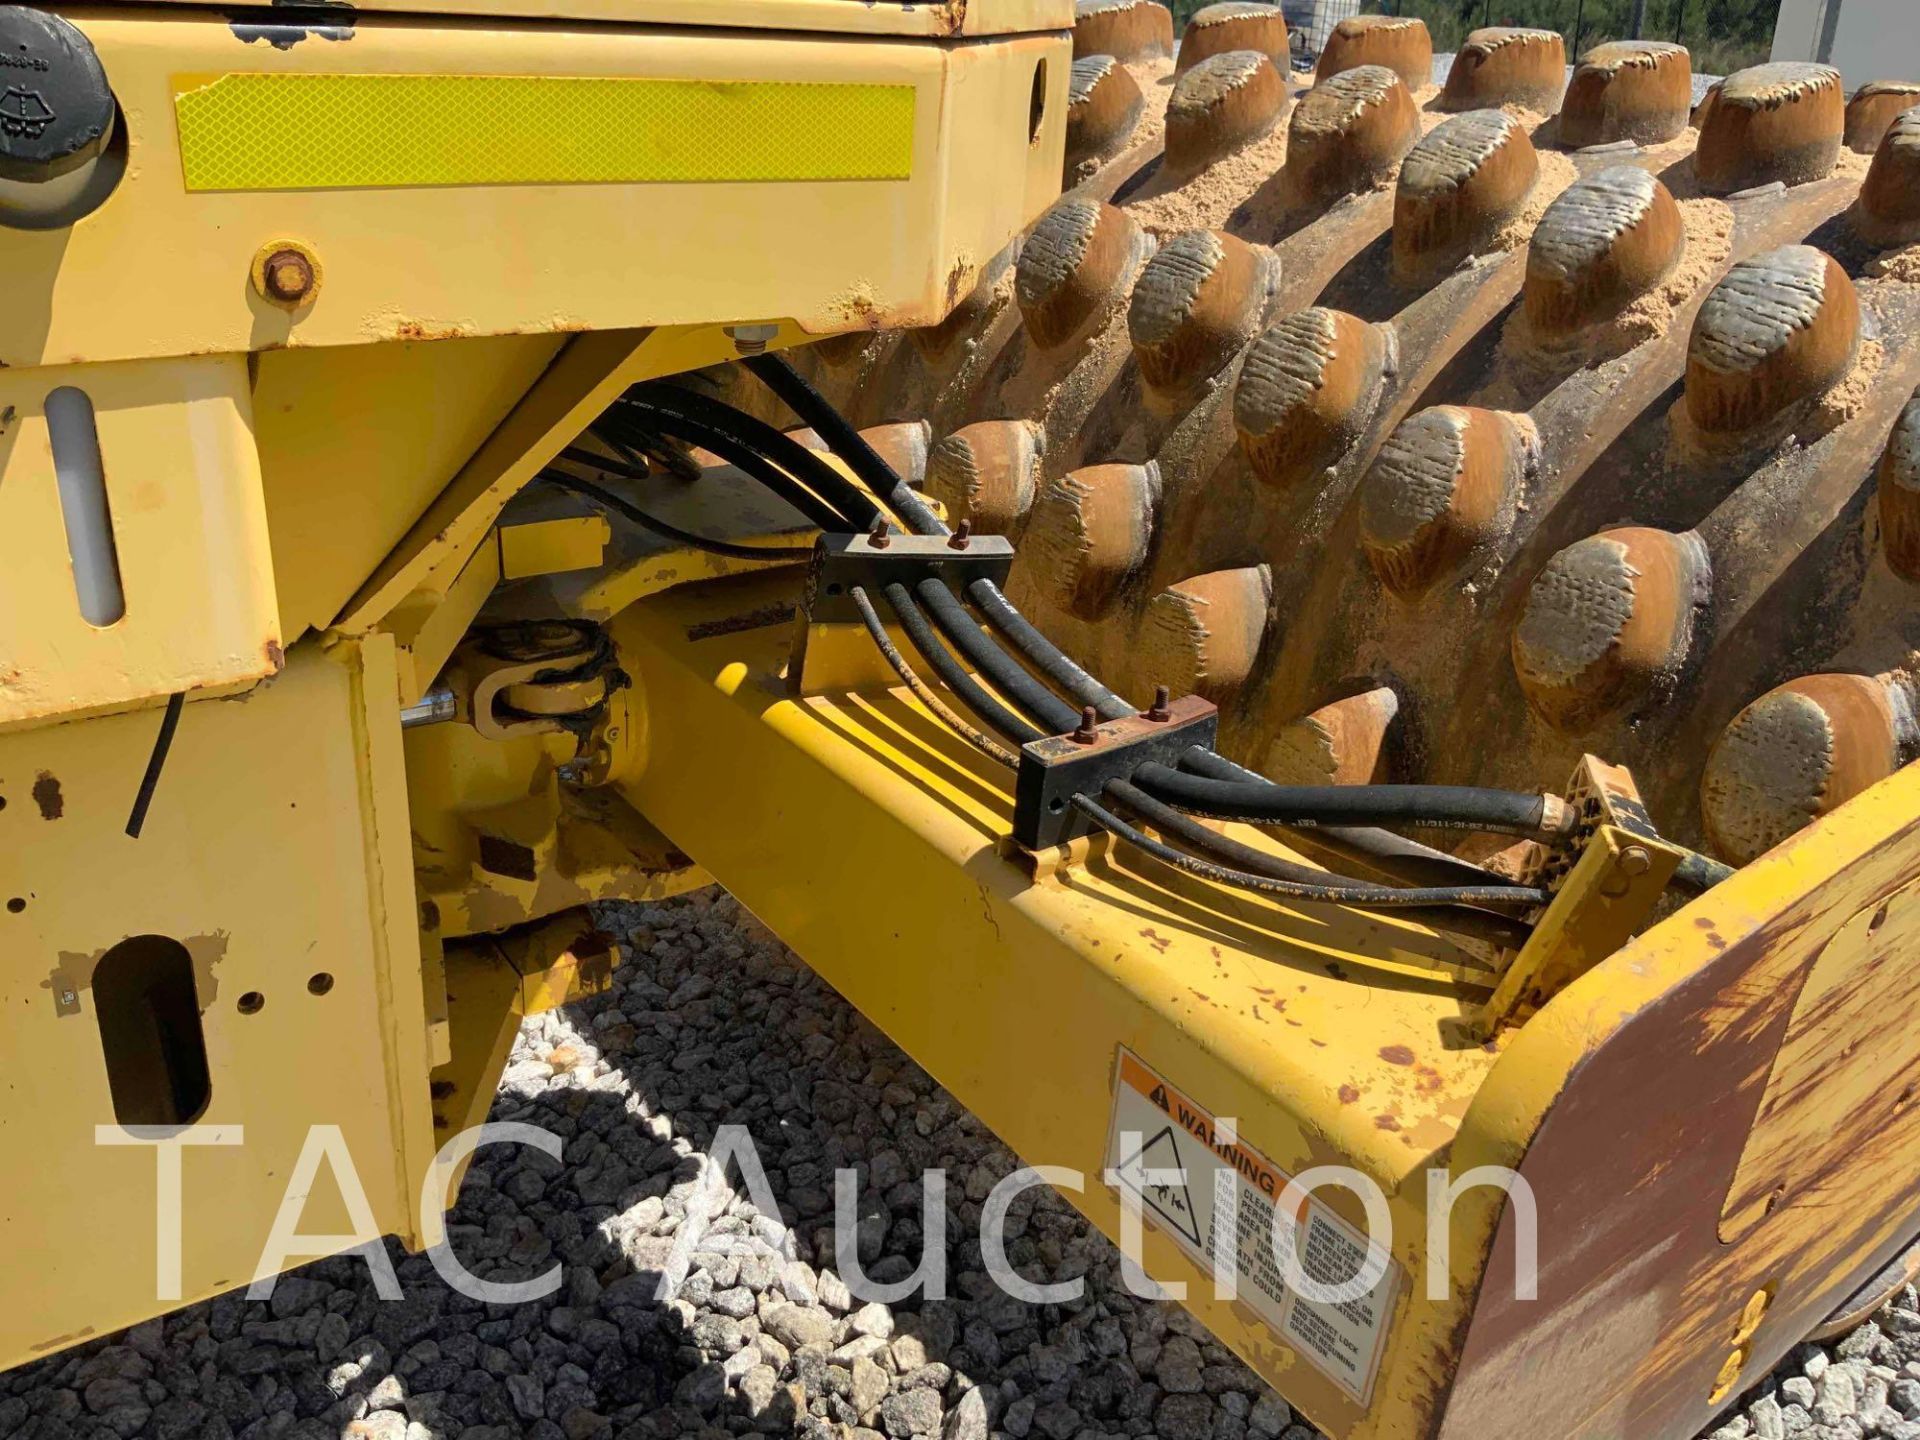 2004 Caterpillar CP-563E Padfoot Vibratory Compactor Roller - Image 26 of 51